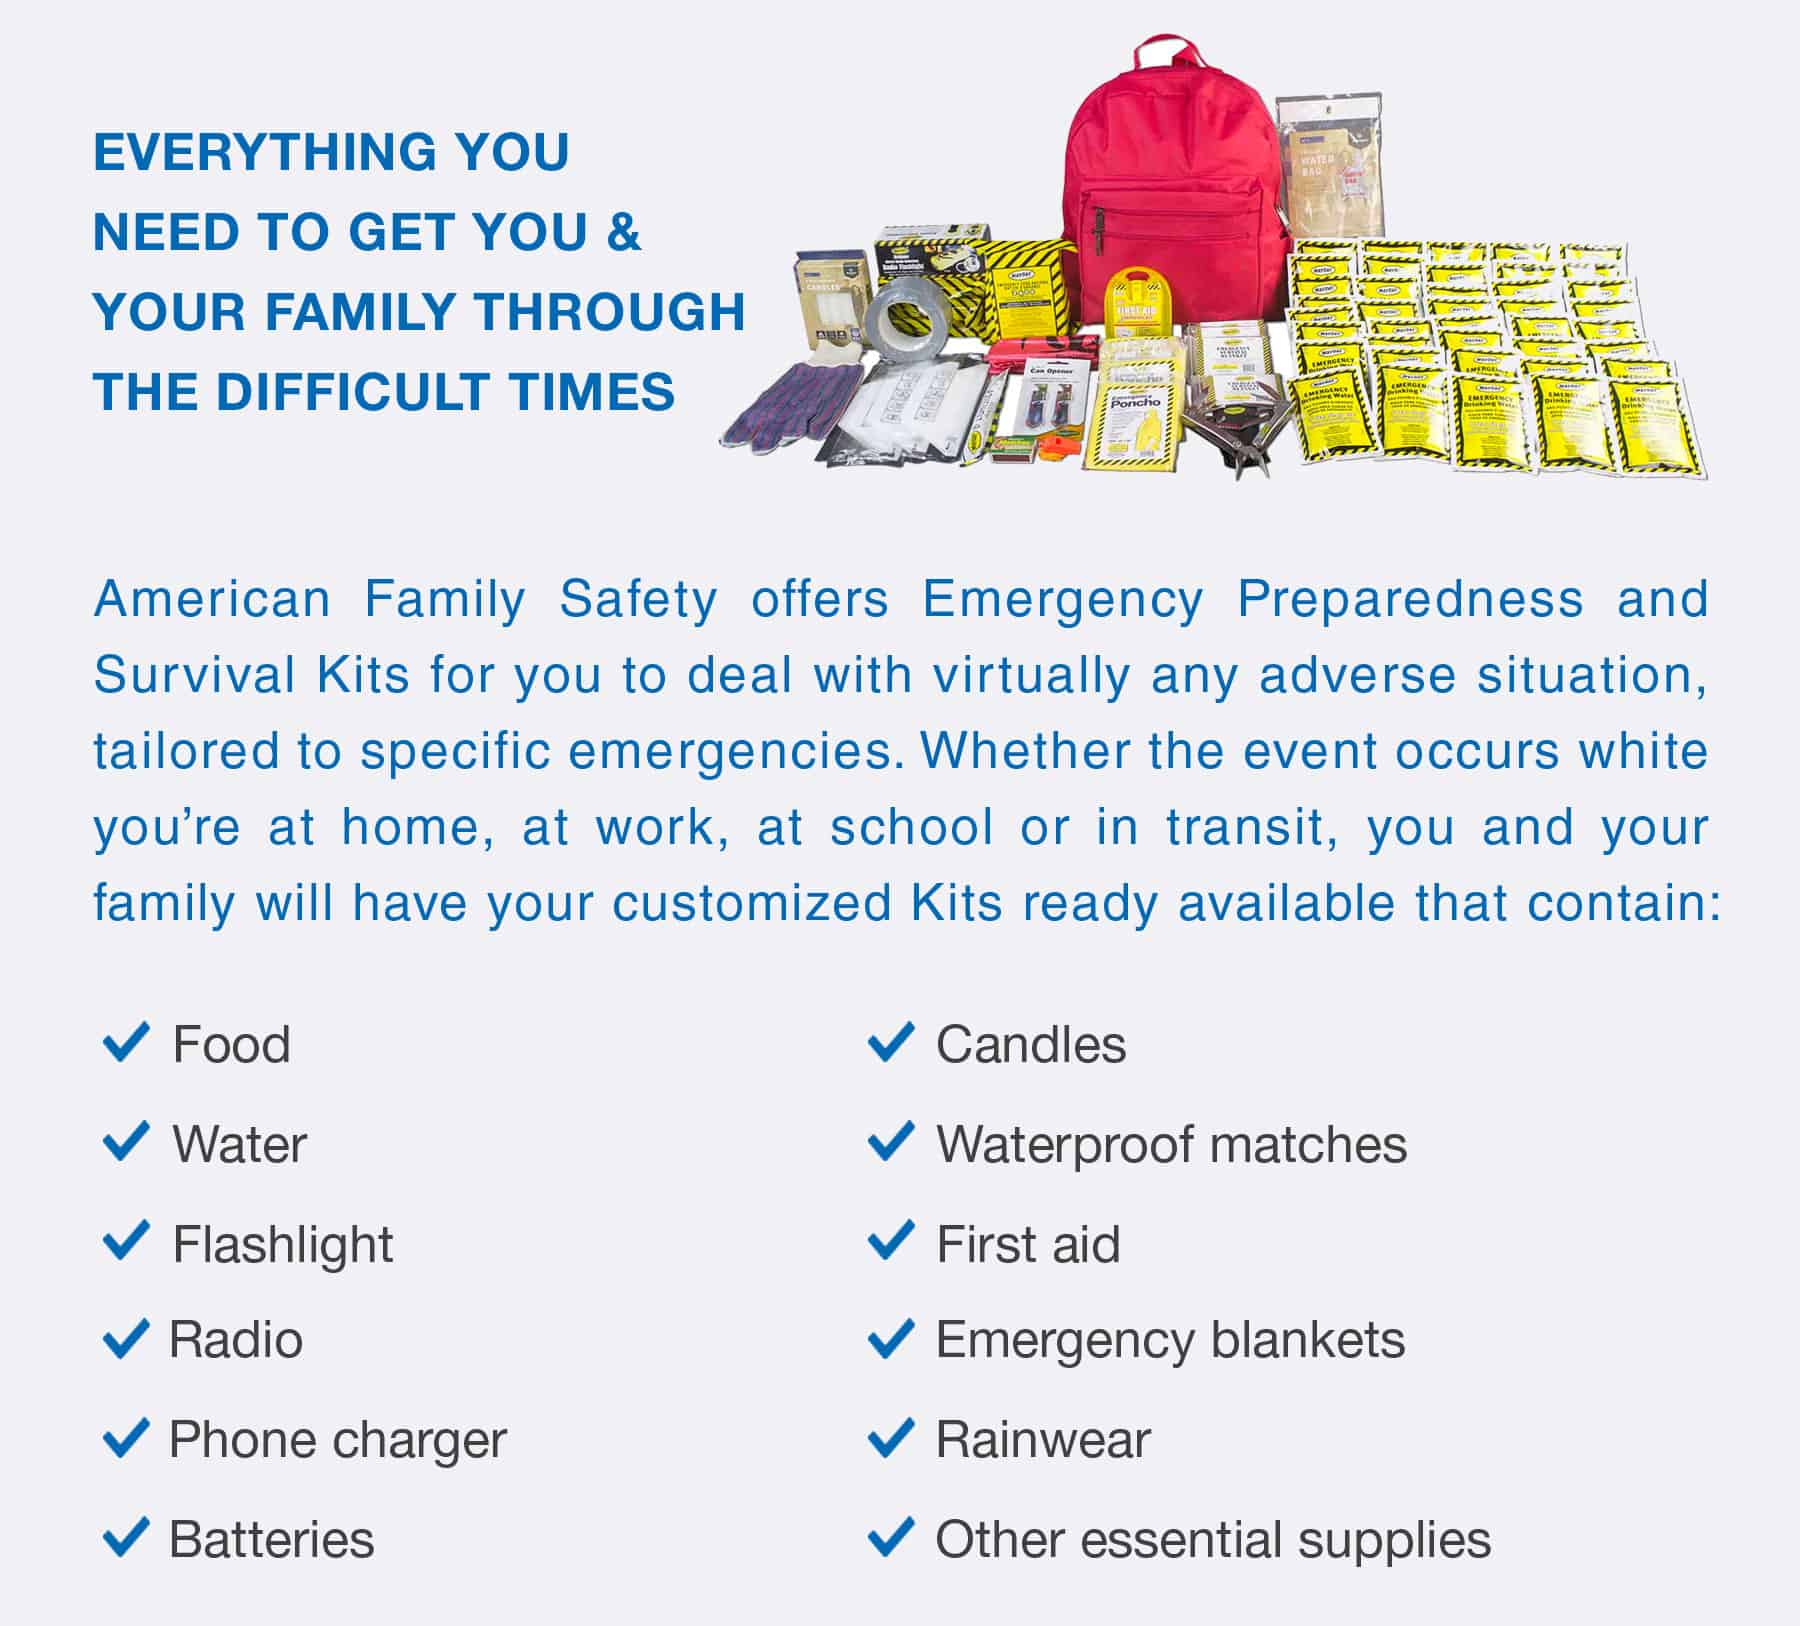 Ready for the Coronavirus? American Family Safety is the leading provider of EMERGENCY PREPAREDNESS KITS For Home, Office, School and Seniors